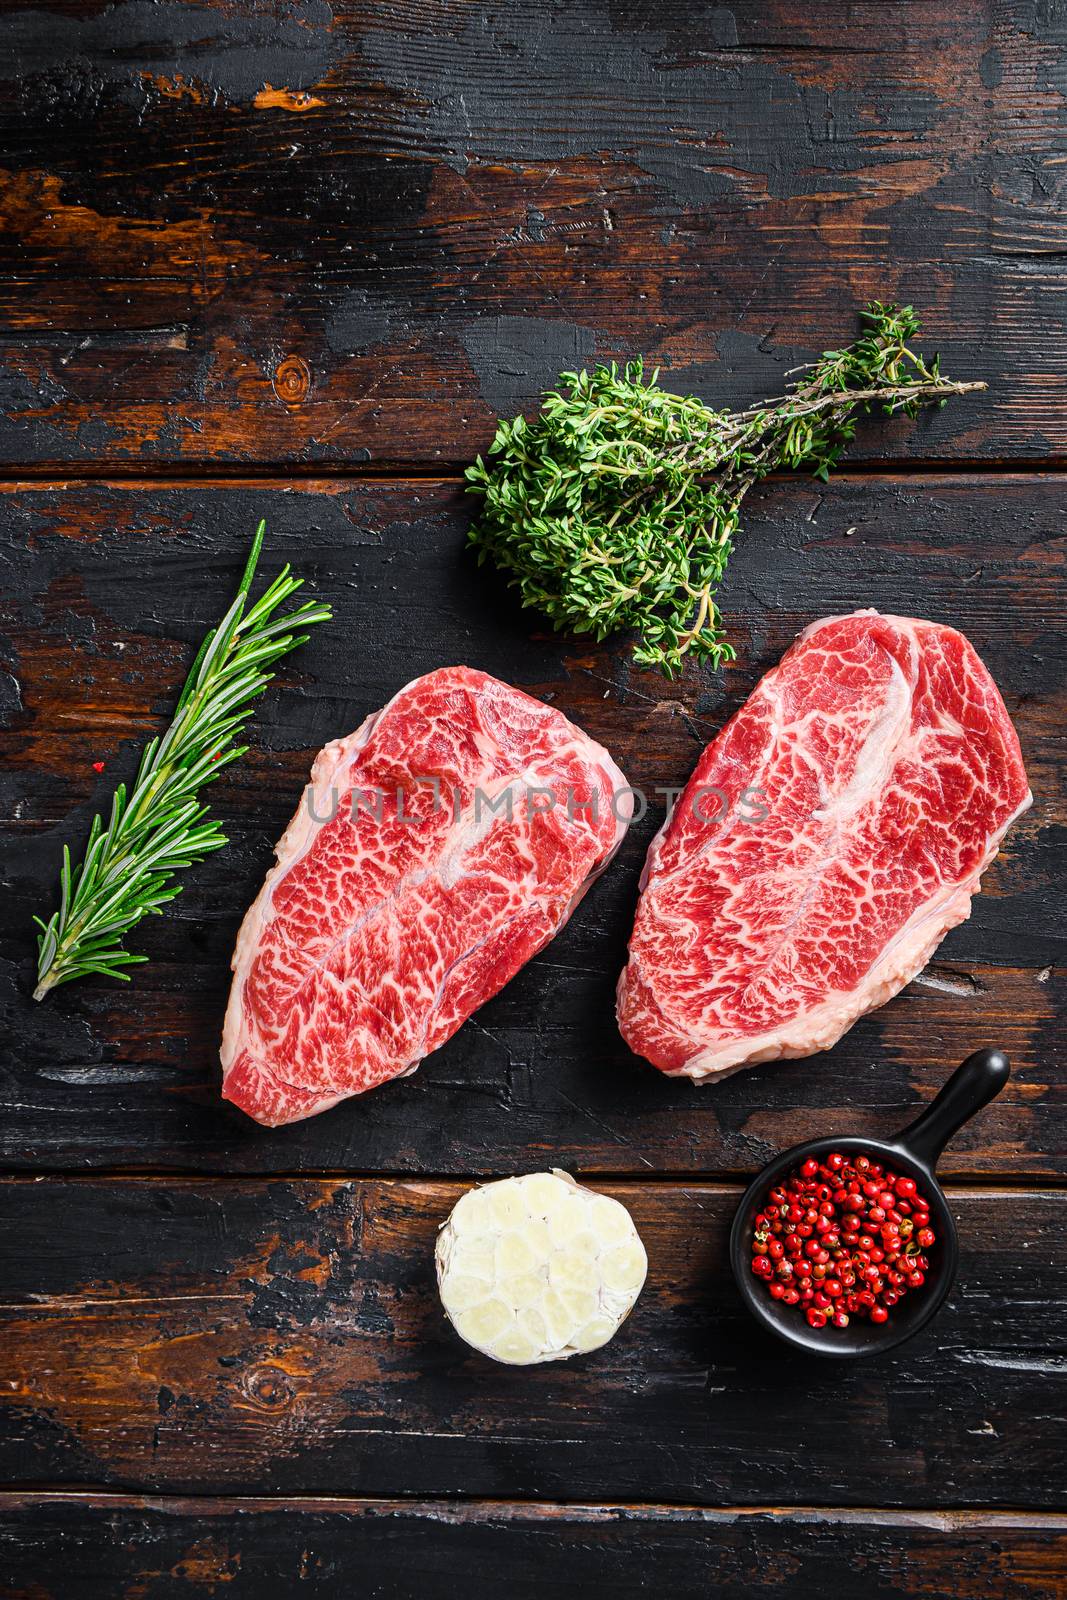 Top blade steak, bio raw meat, marbled beef . old wood table background. Top view by Ilianesolenyi